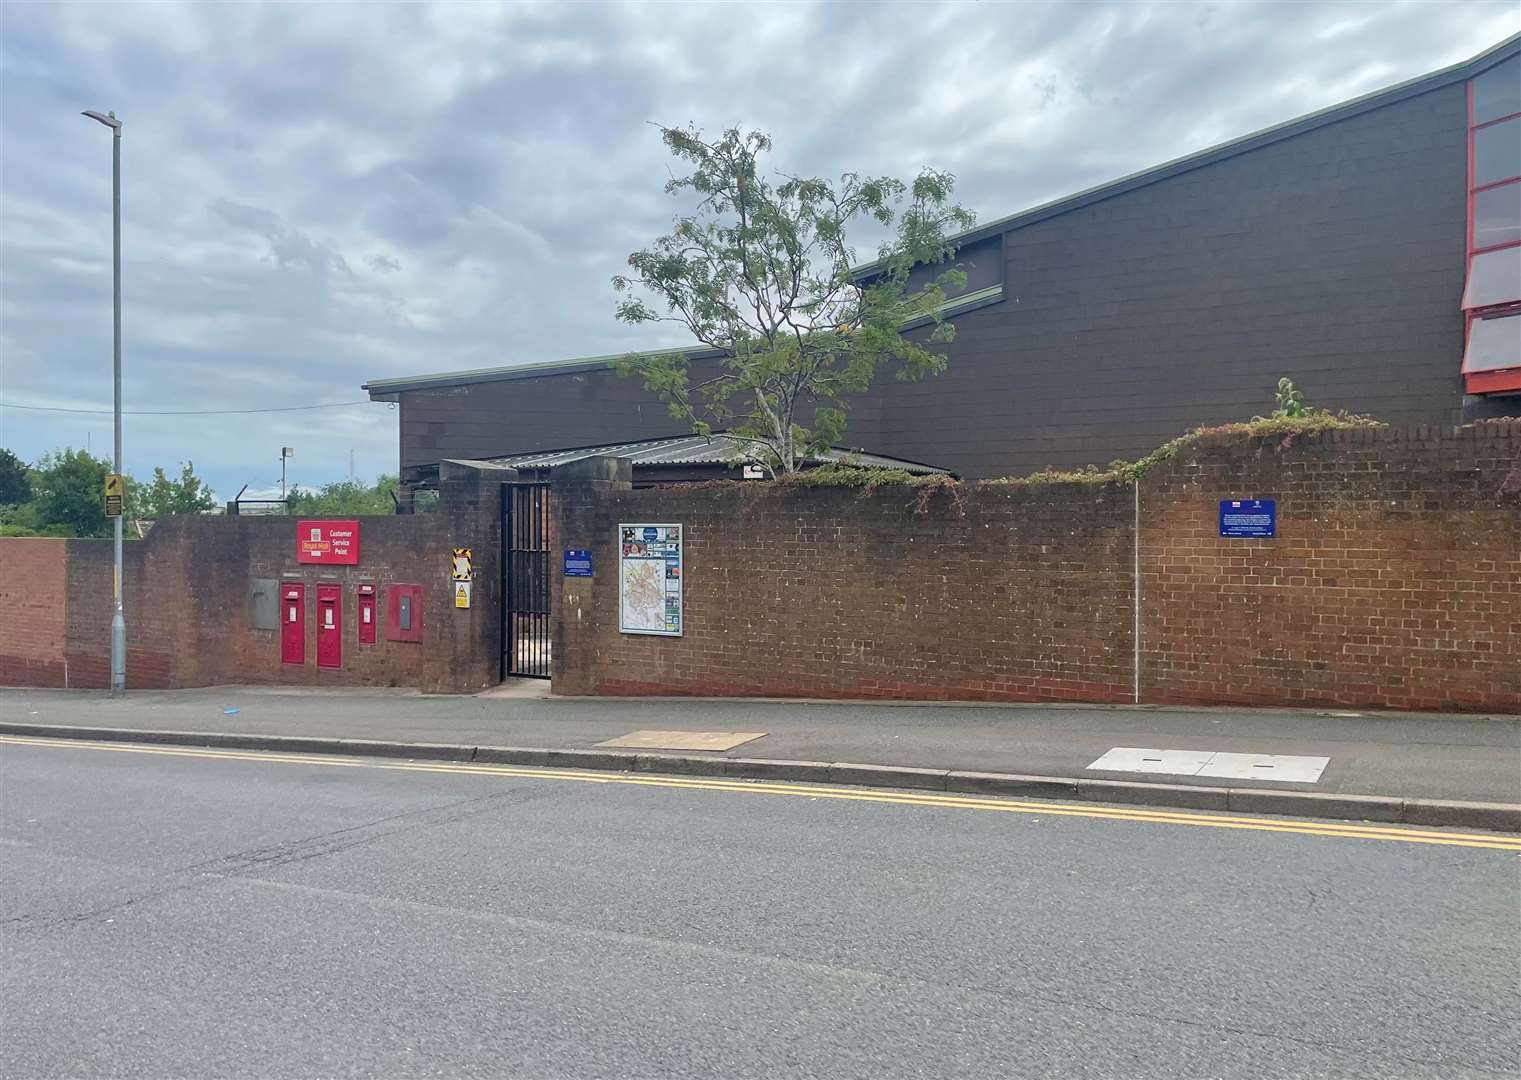 The delivery office in Tannery Lane, Ashford, is one of many to have its opening hours cut